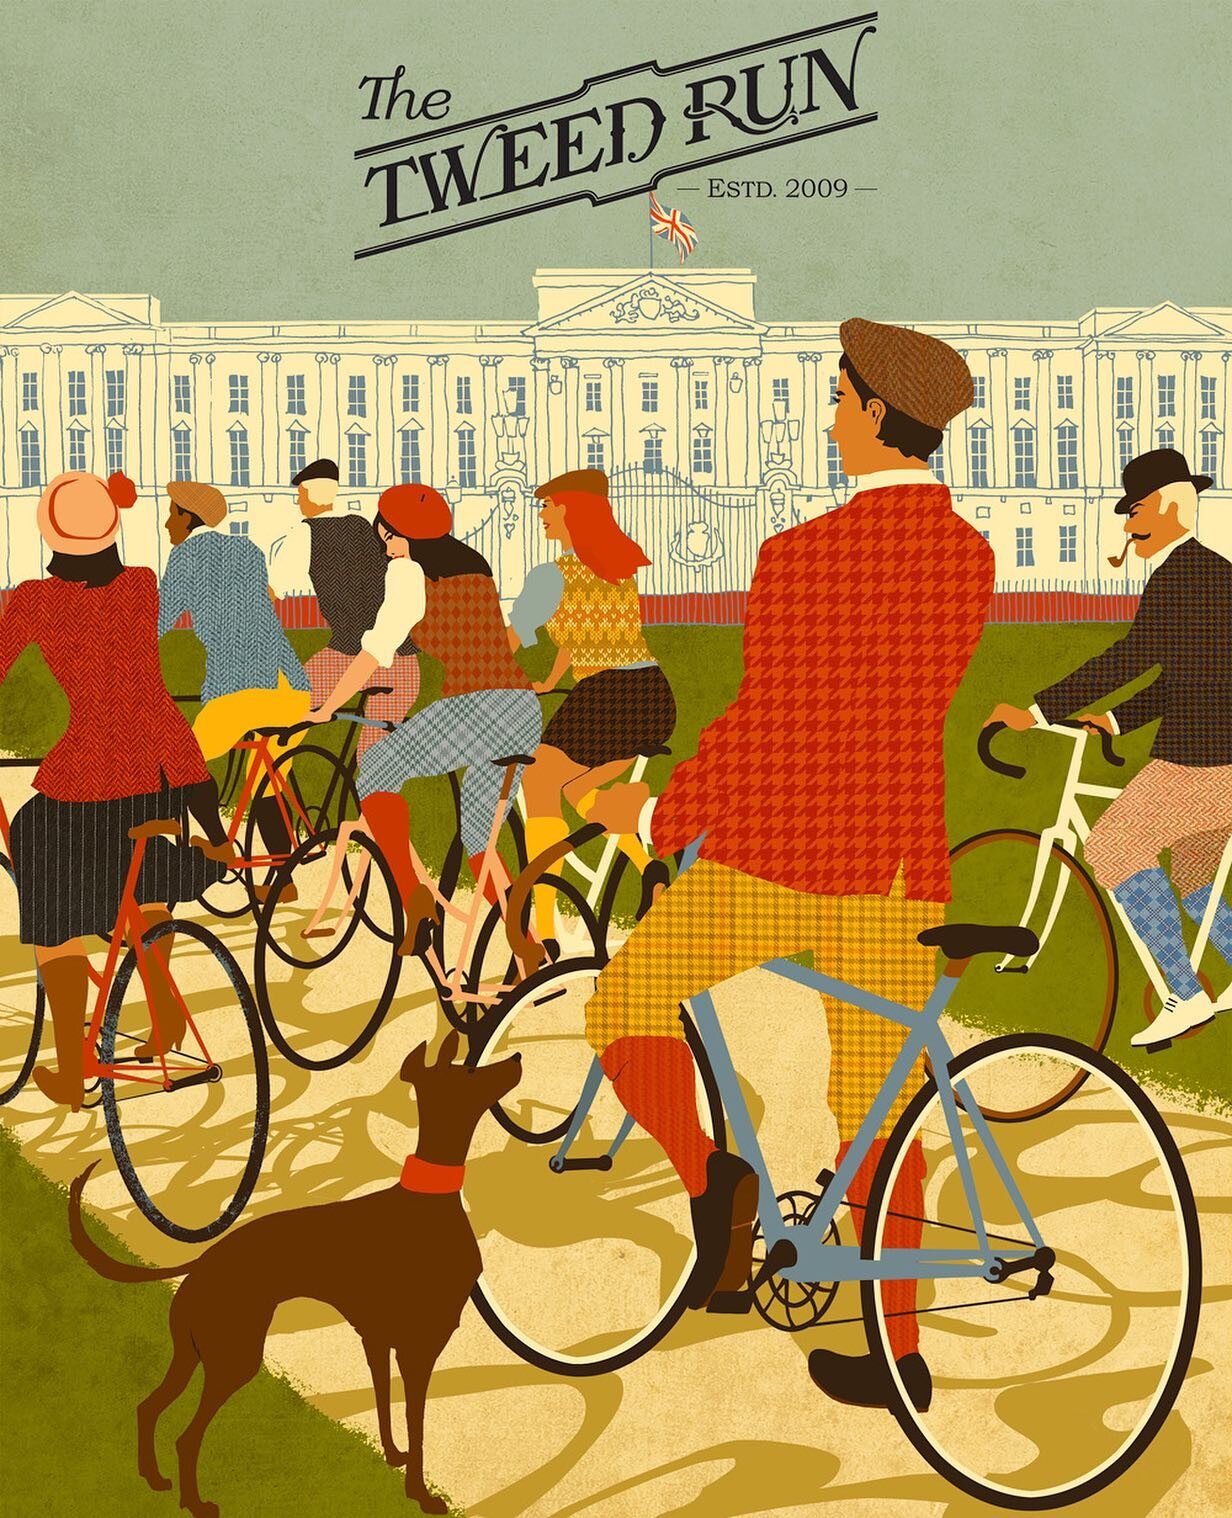 Artwork for the London #tweedrun which is taking place at the end of this month. &ldquo;A metropolitan bicycle ride with a bit of style&rdquo;
.
.
.
#illustration #posterart #tweedrun #vintage #retrobikes #style